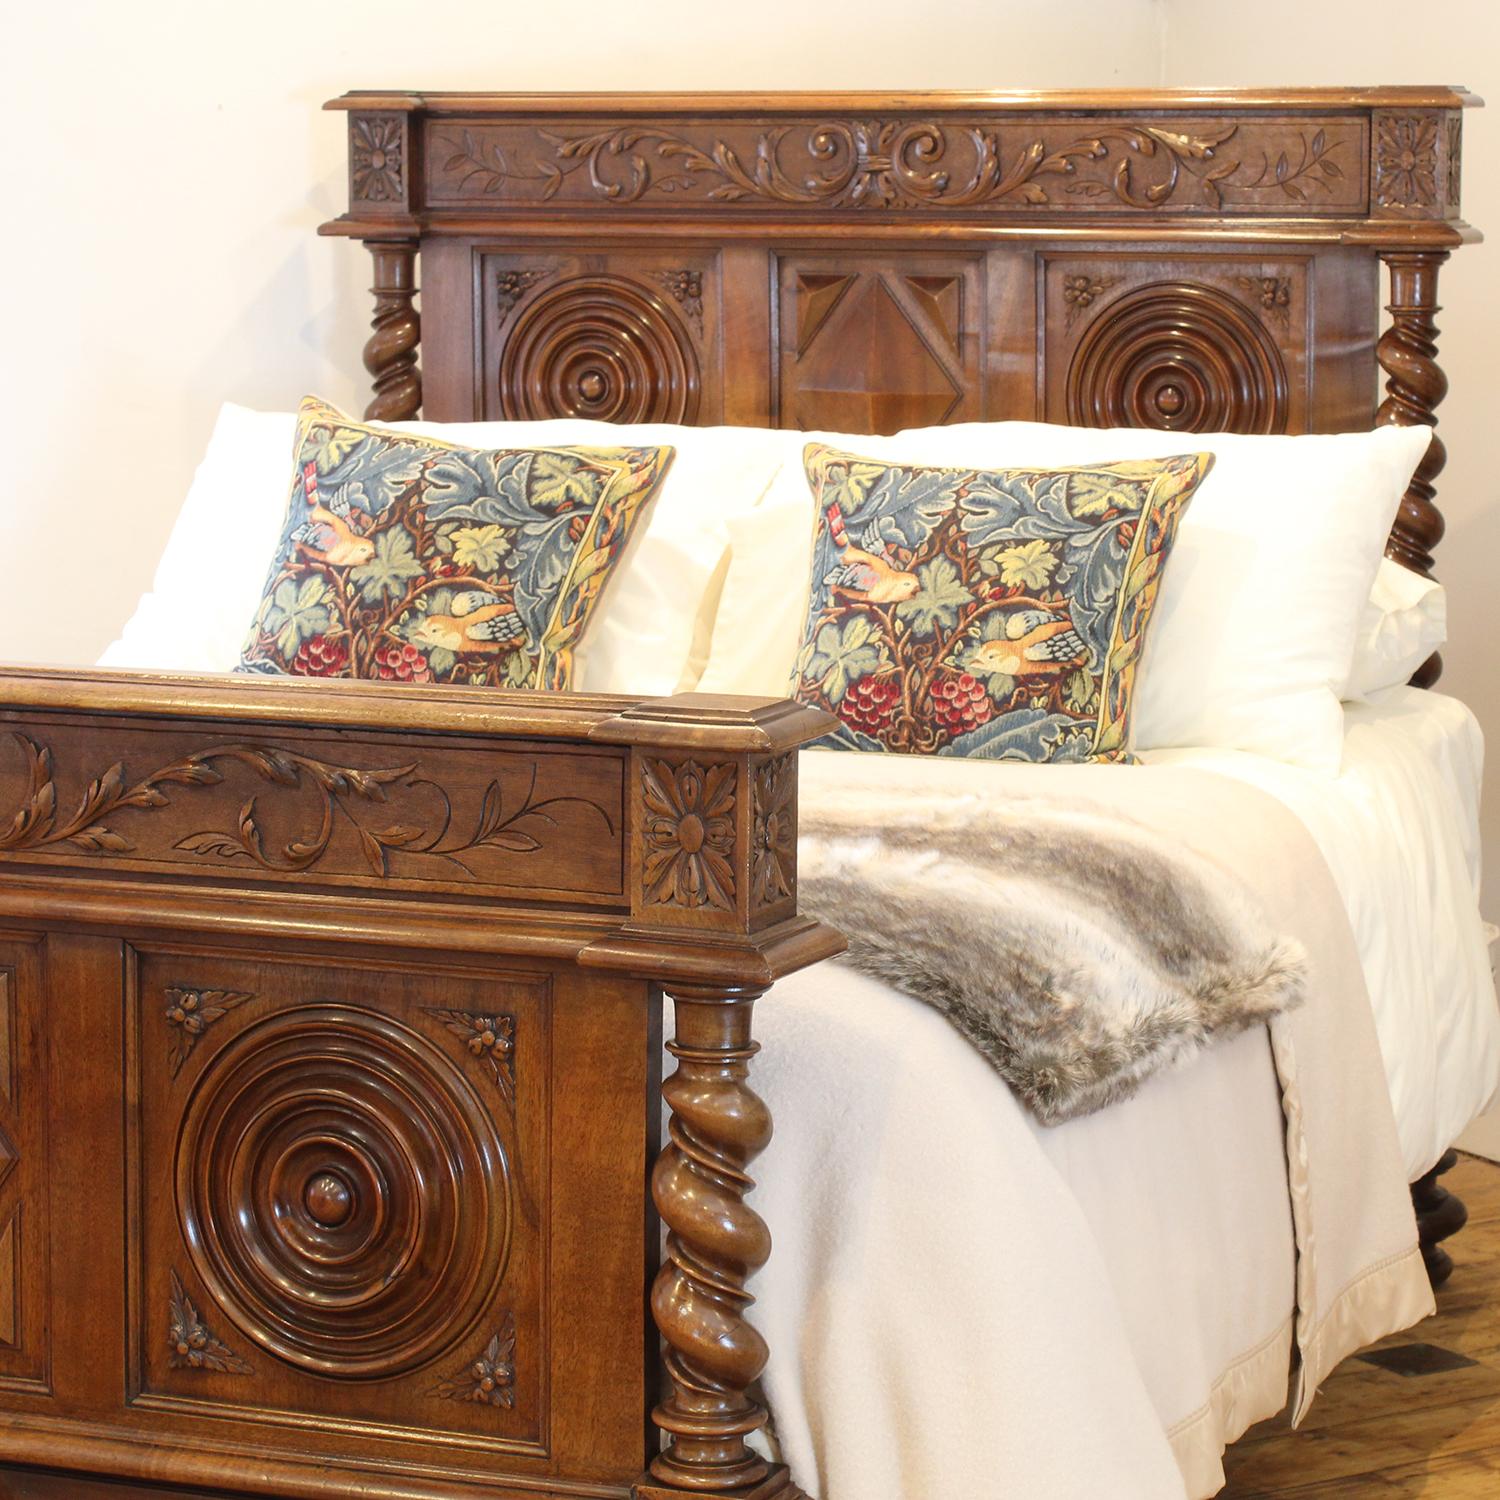 An impressive bedstead in walnut with decoratively carved panels, and turned barley twist posts.

This bed accepts a British king size or American queen size, 5ft wide (60 inches or 150cm) base and mattress set, with an overlap (as shown)

The